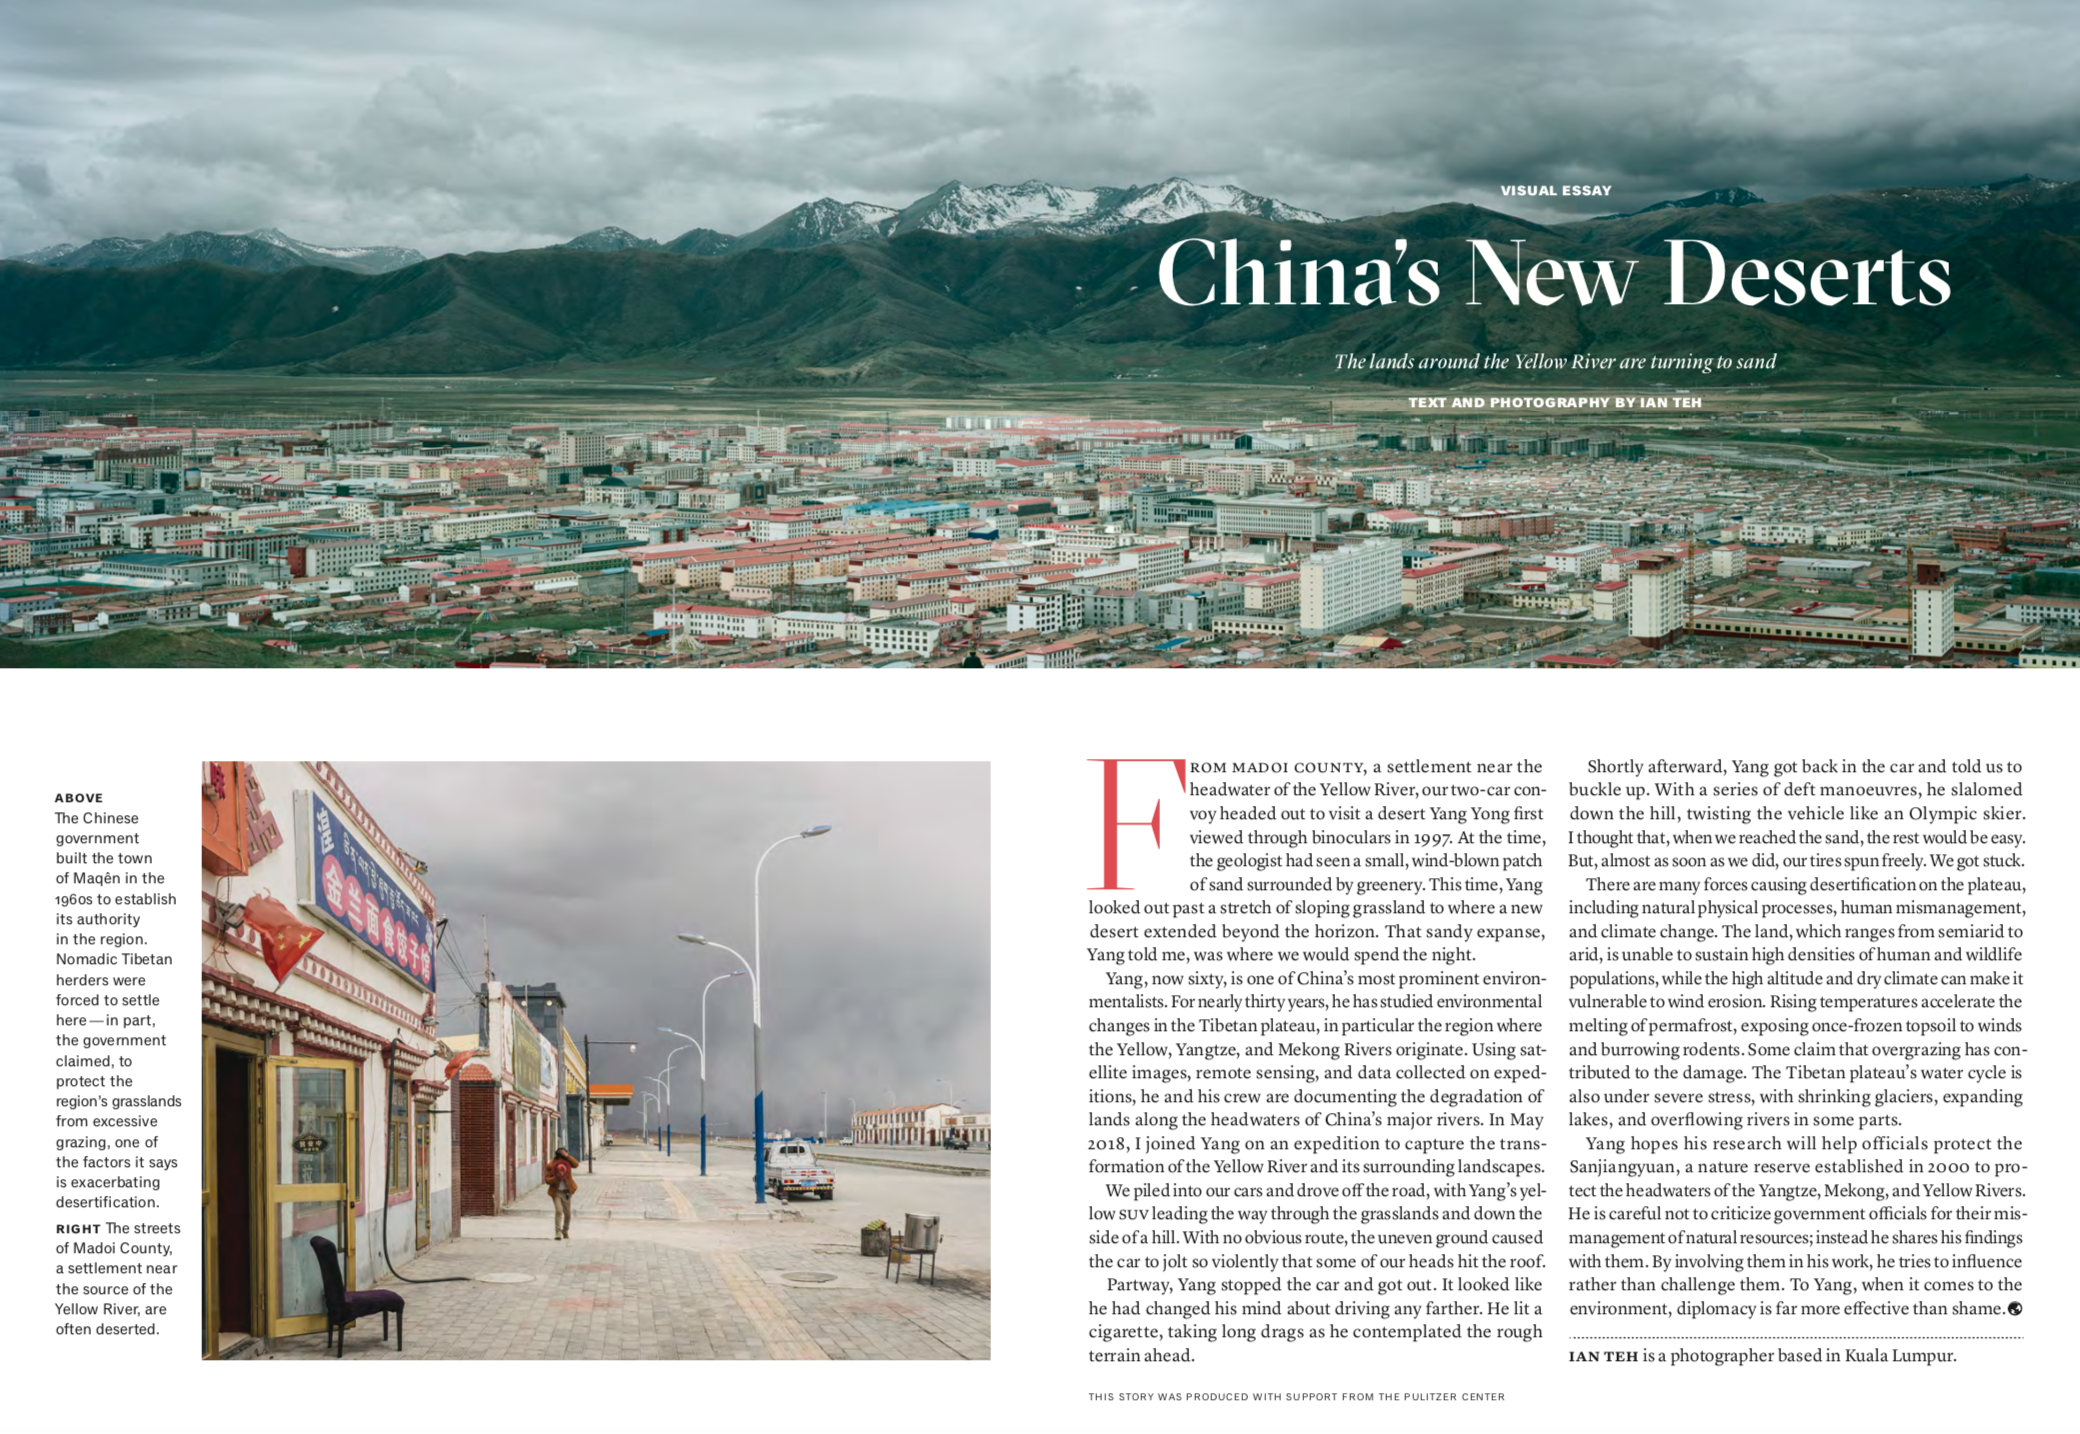 China's New Deserts by Ian Teh.